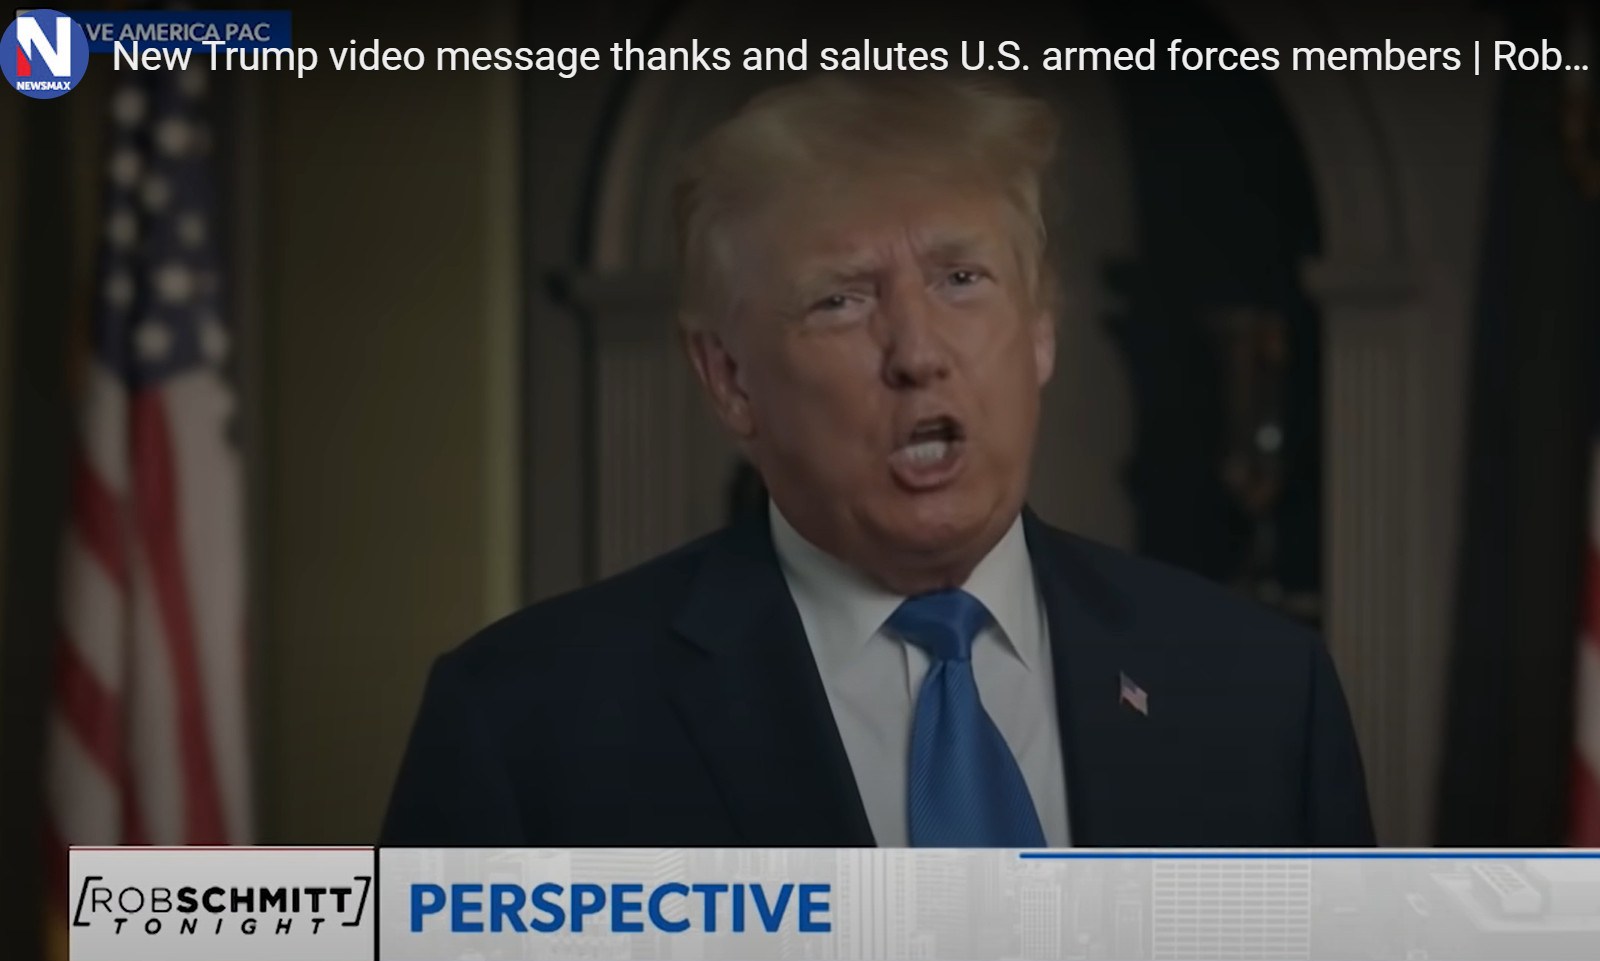 President Trump video message thanks and salutes military